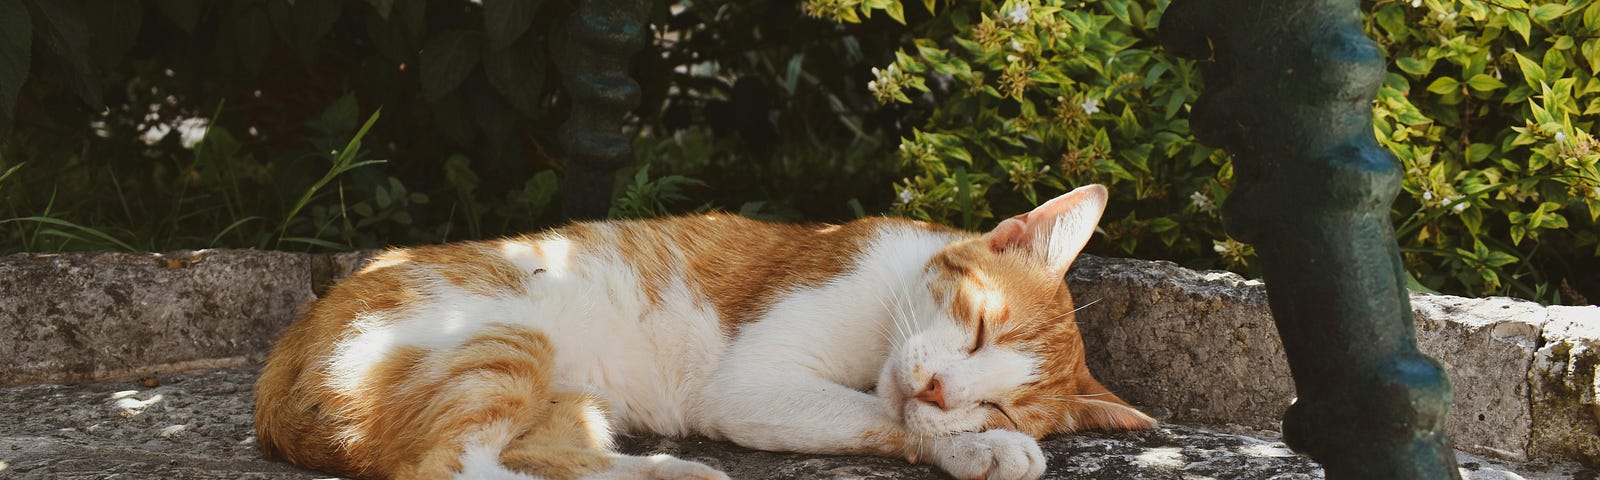 ginger and white cate reclining on concrete slab with bushes in background